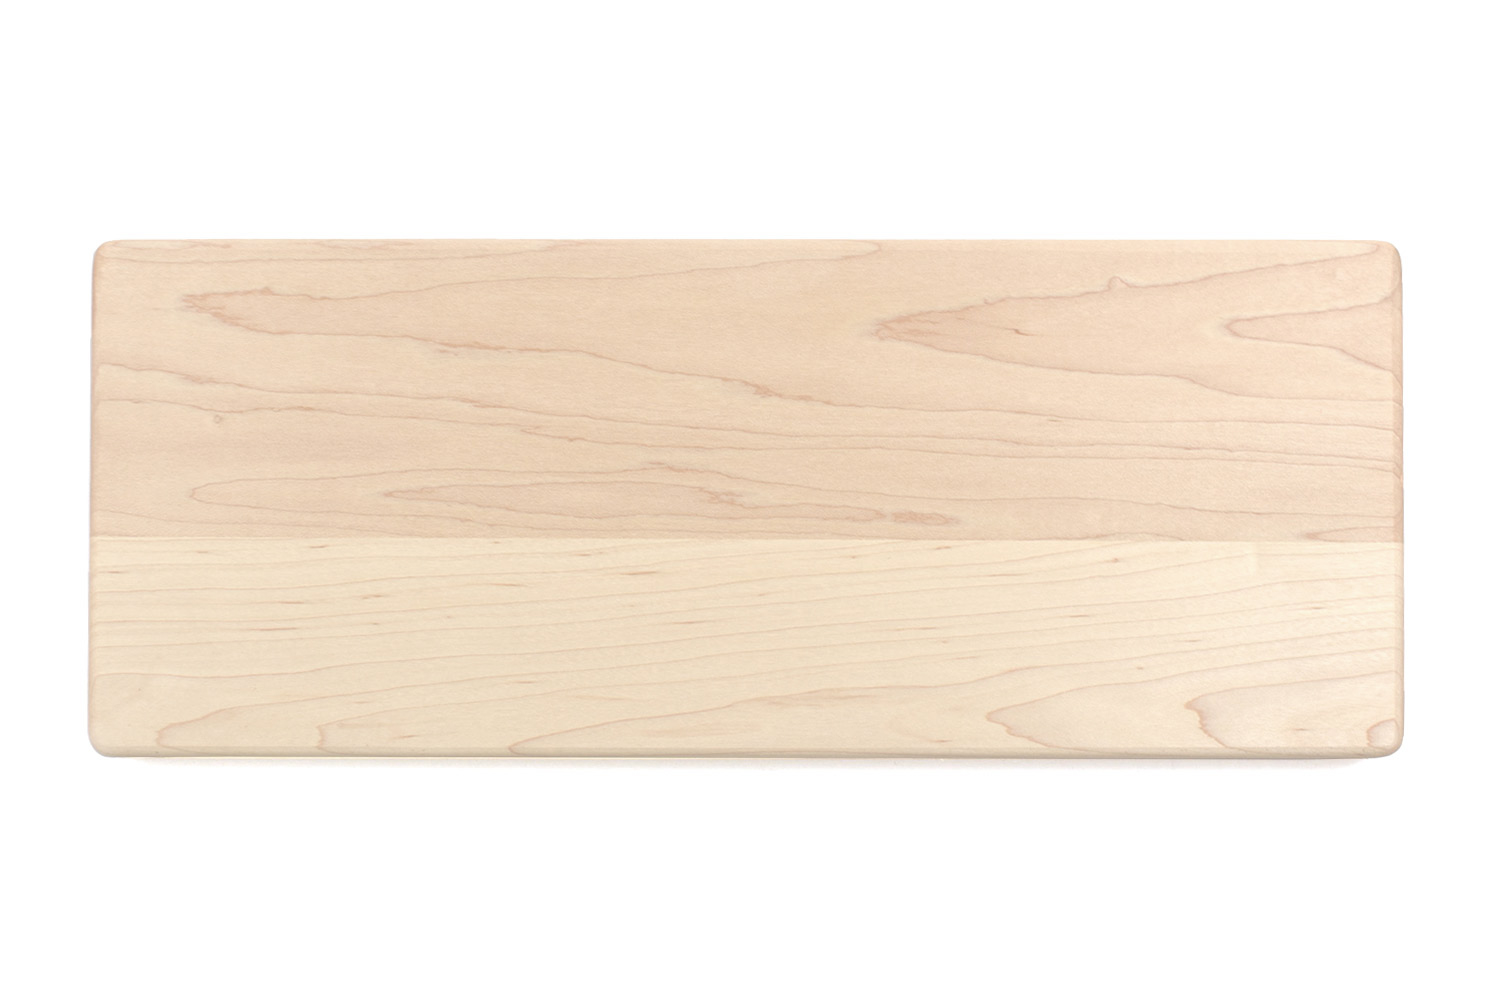 Maple Small cheese and serving board with rounded edges